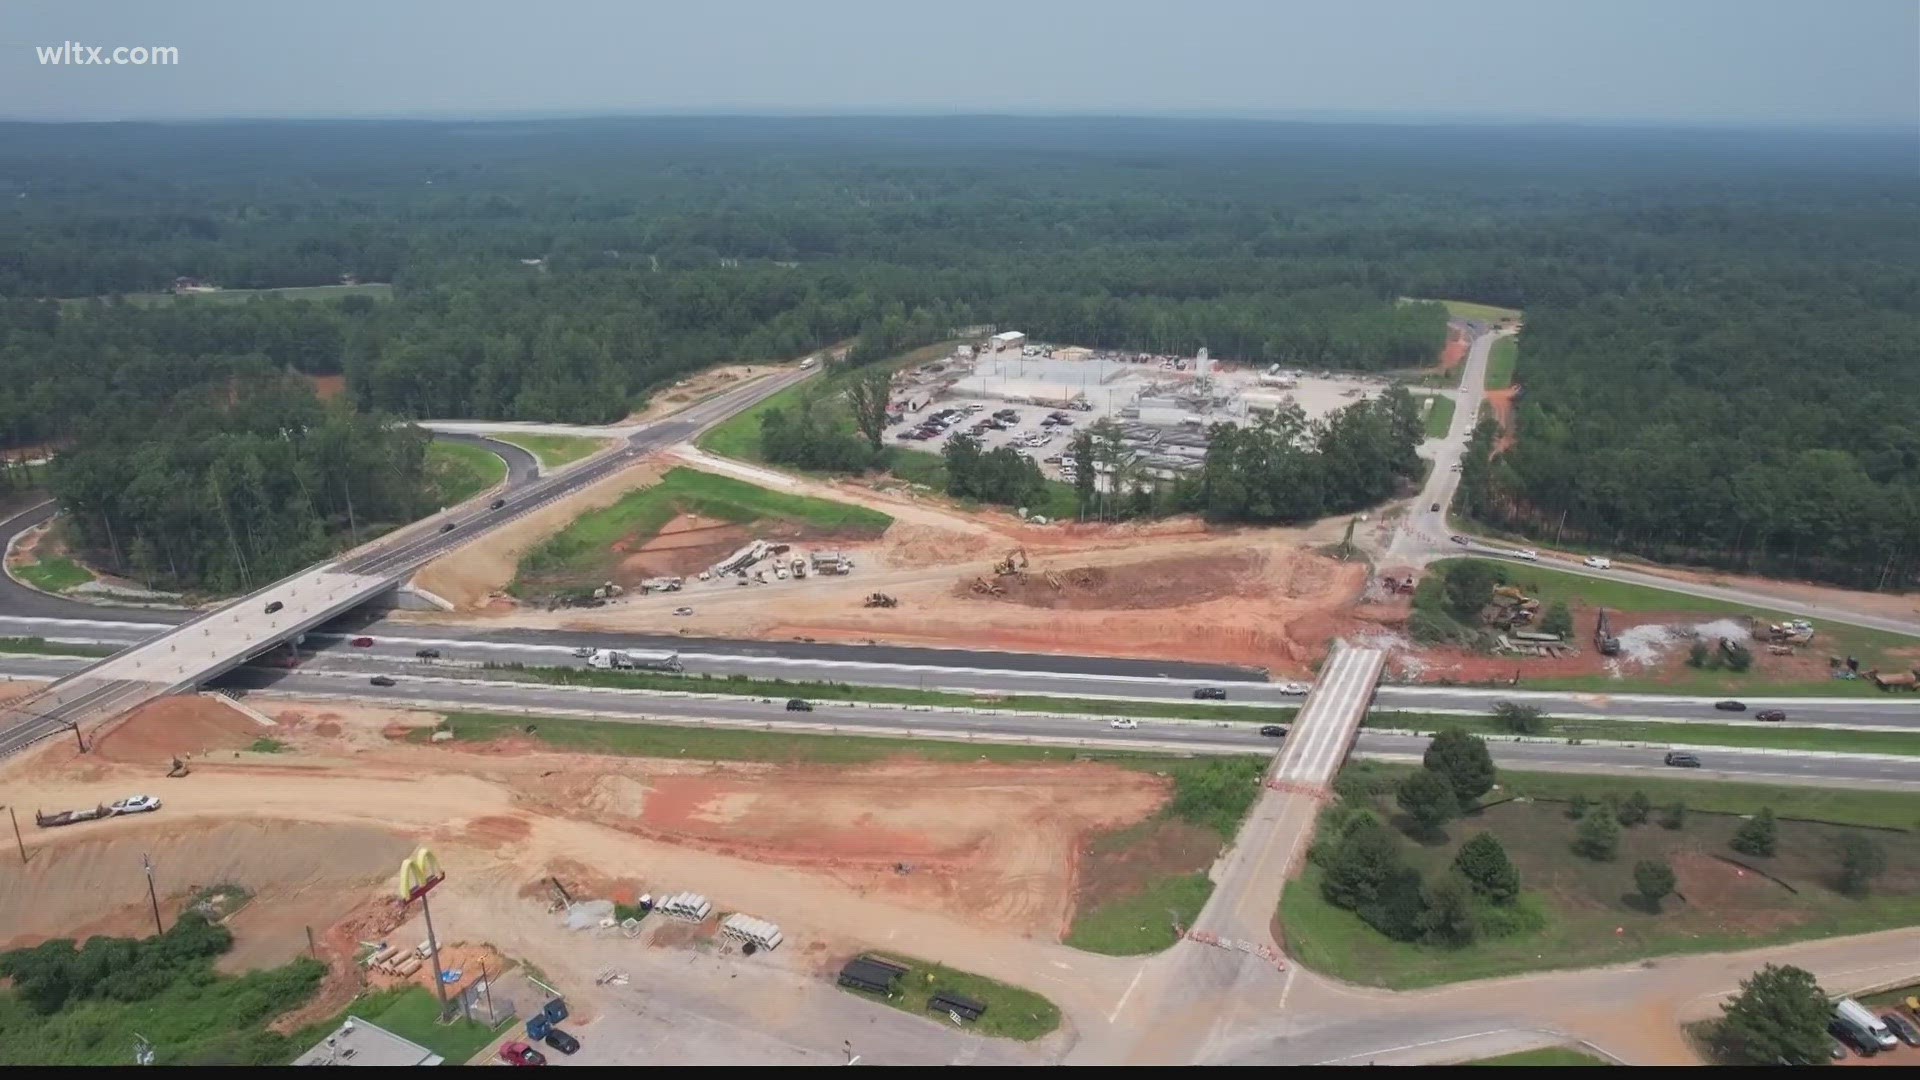 It's part of the ongoing Midlands Connection project, a 16 mile stretch of interstate improvements between exit 85 and Exit 101.